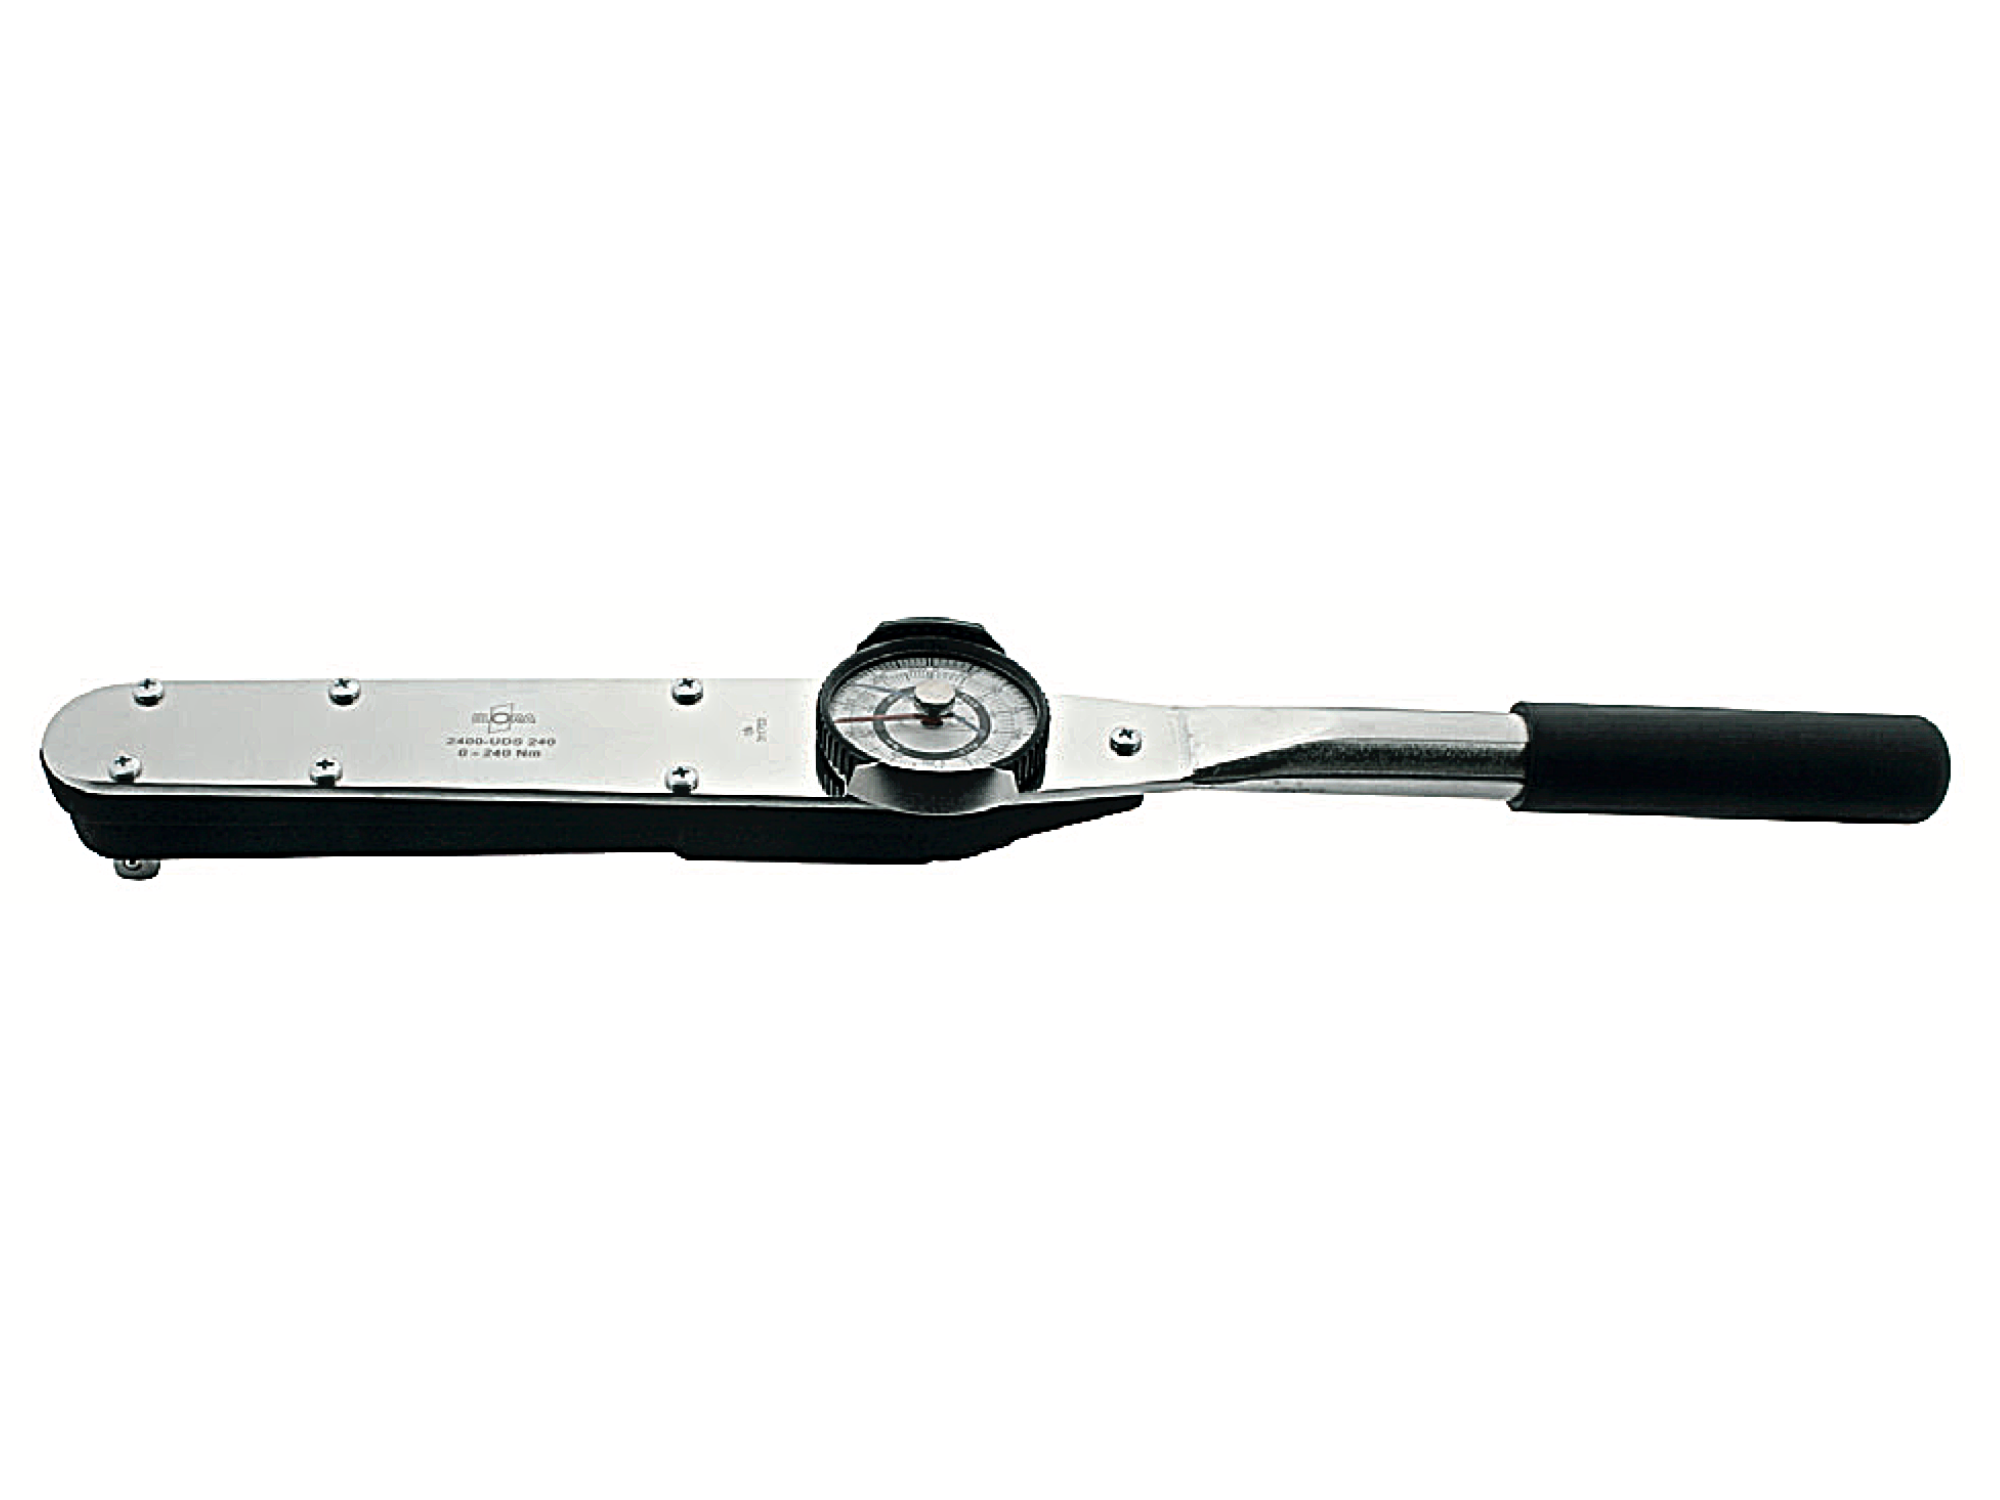 ELORA 2400-UDS1400/2800 Elometer 1" Torque Wrench With Drag - Premium 1" Torque Wrench from ELORA - Shop now at Yew Aik.